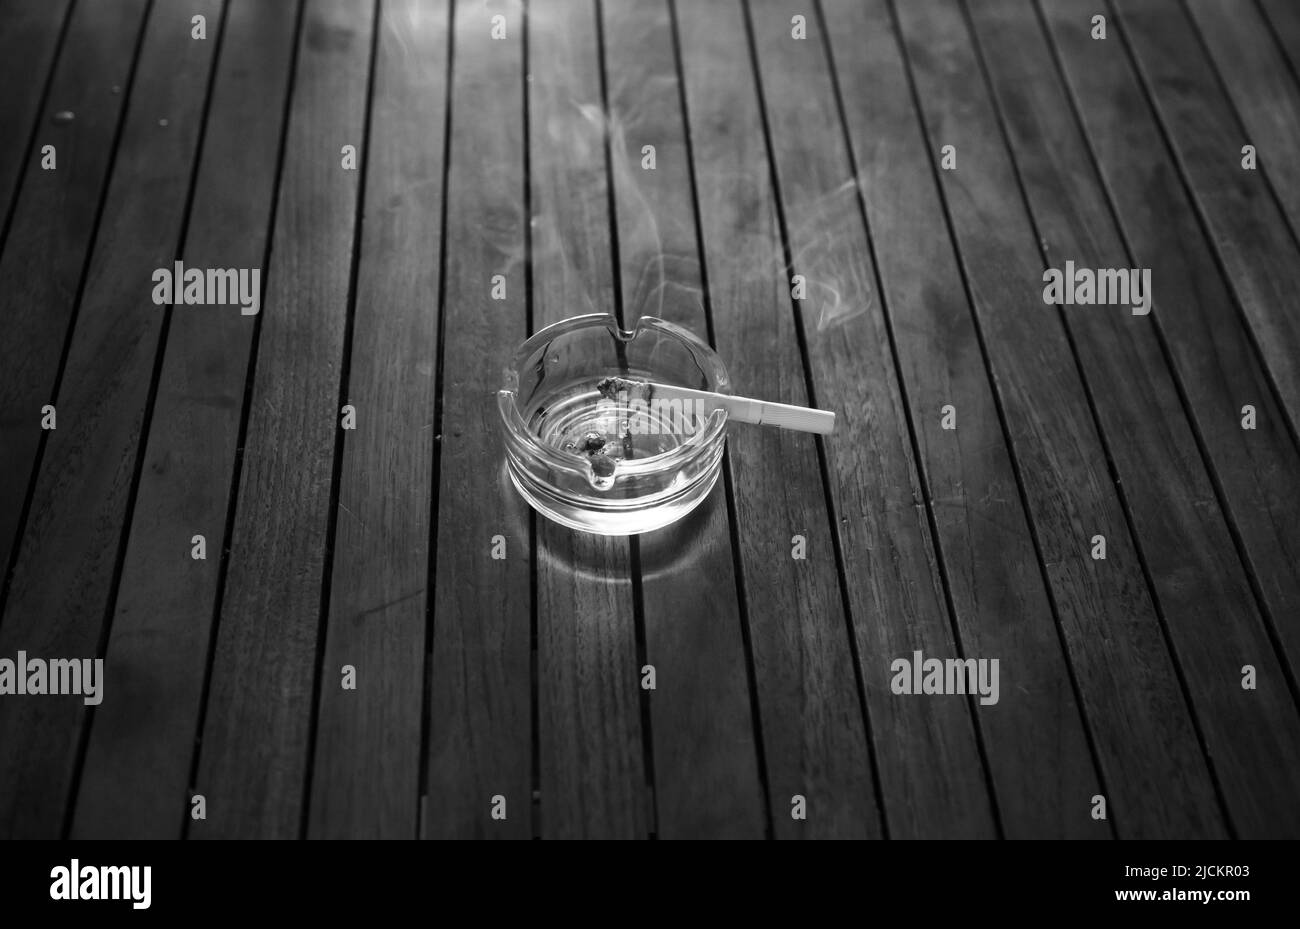 Burning cigarette in a glass ashtray on a wooden table. Black and white. Stock Photo